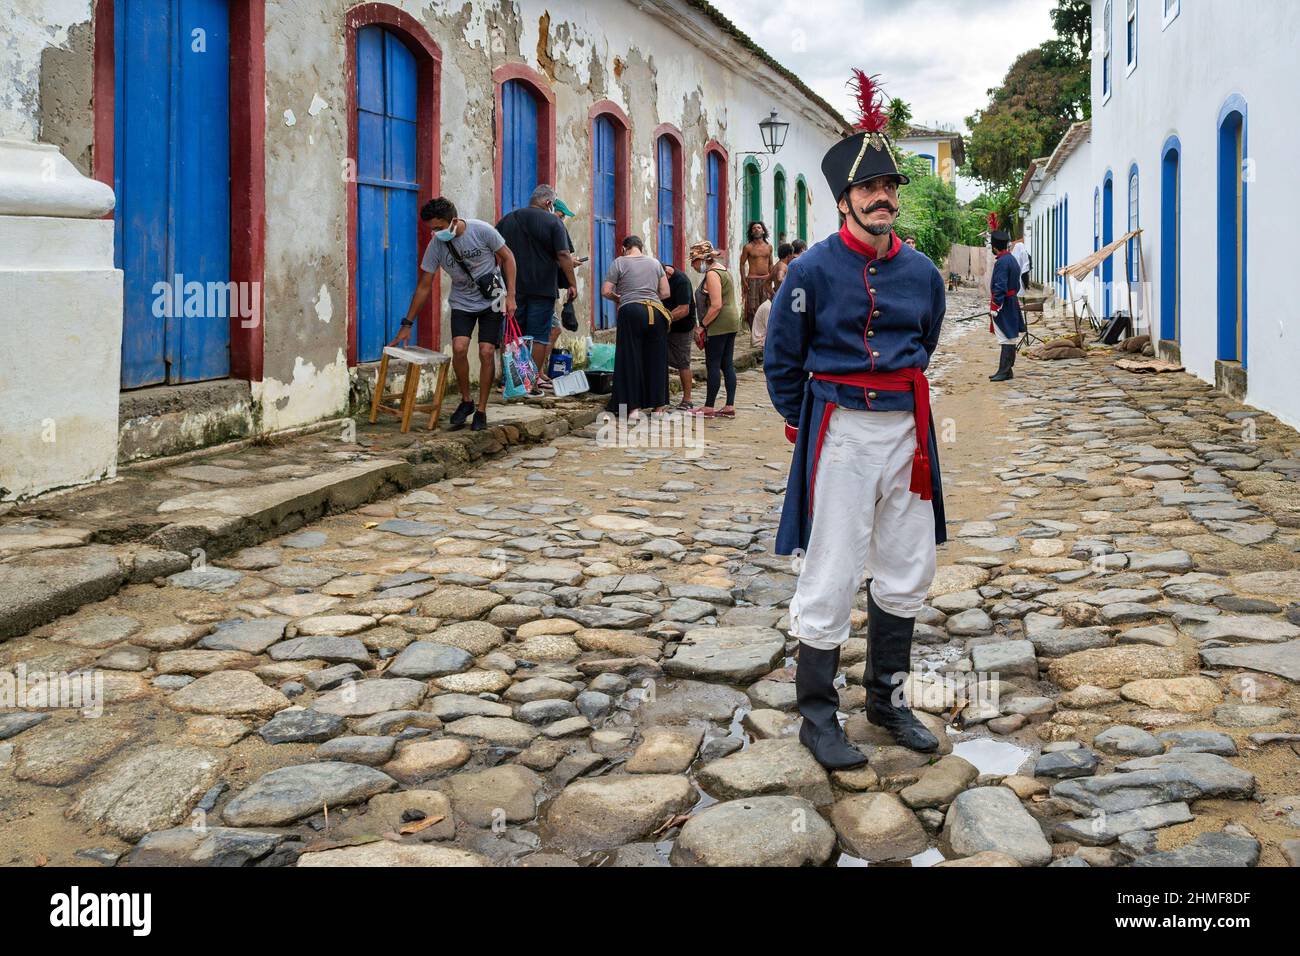 The filming of a TV show or movie set in colonial times in Brazil. There are some actors dressed as soldiers and others as slaves. The scene happens i Stock Photo